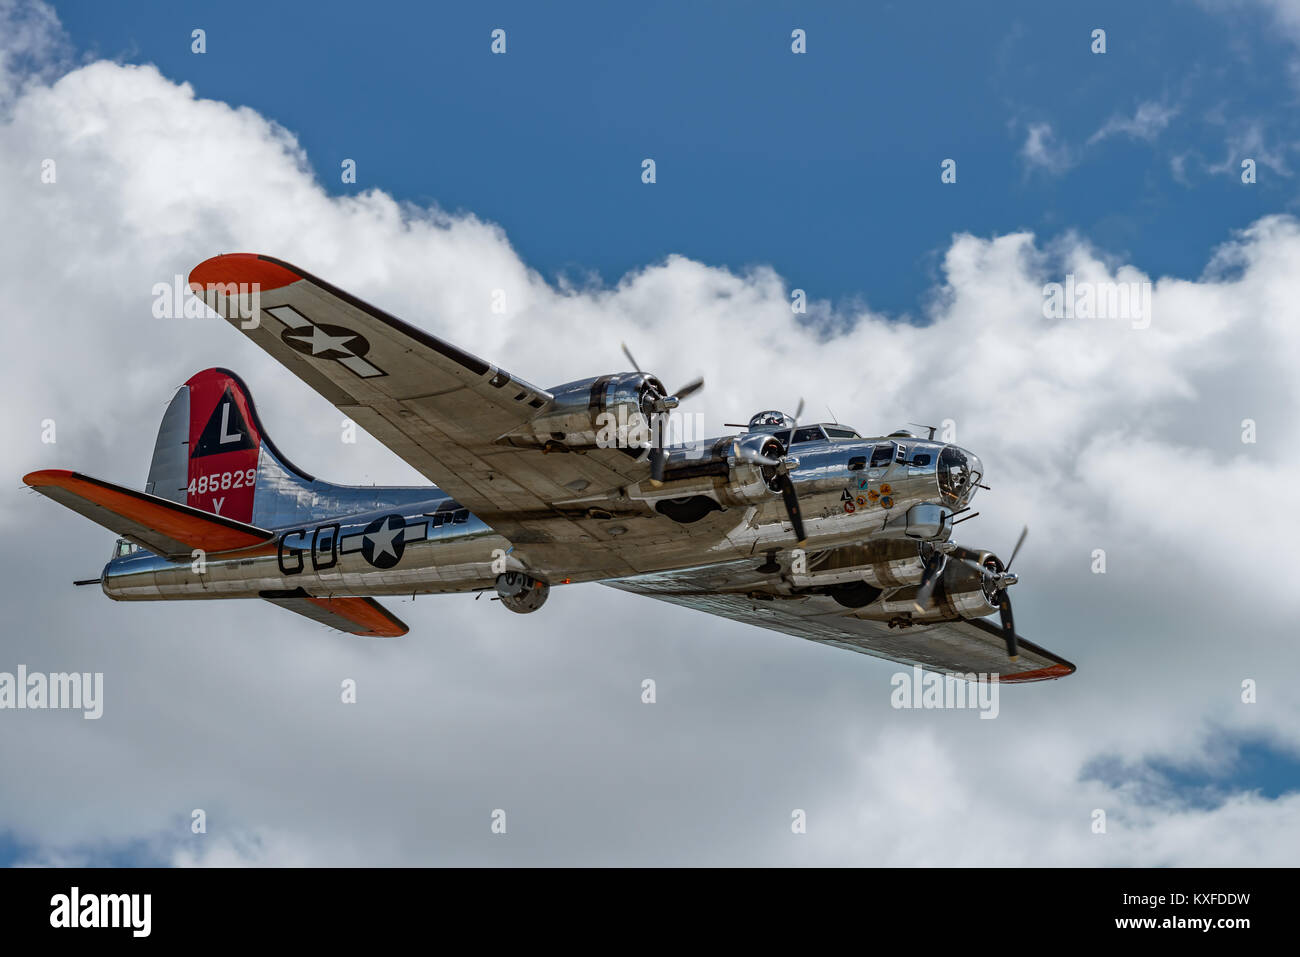 READING, PA - JUNE 3, 2017: Boening B-17G Flying Fortress 'Yankee Lady' in flight during World War II reenactment at Mid-Atlantic Air Museum Stock Photo